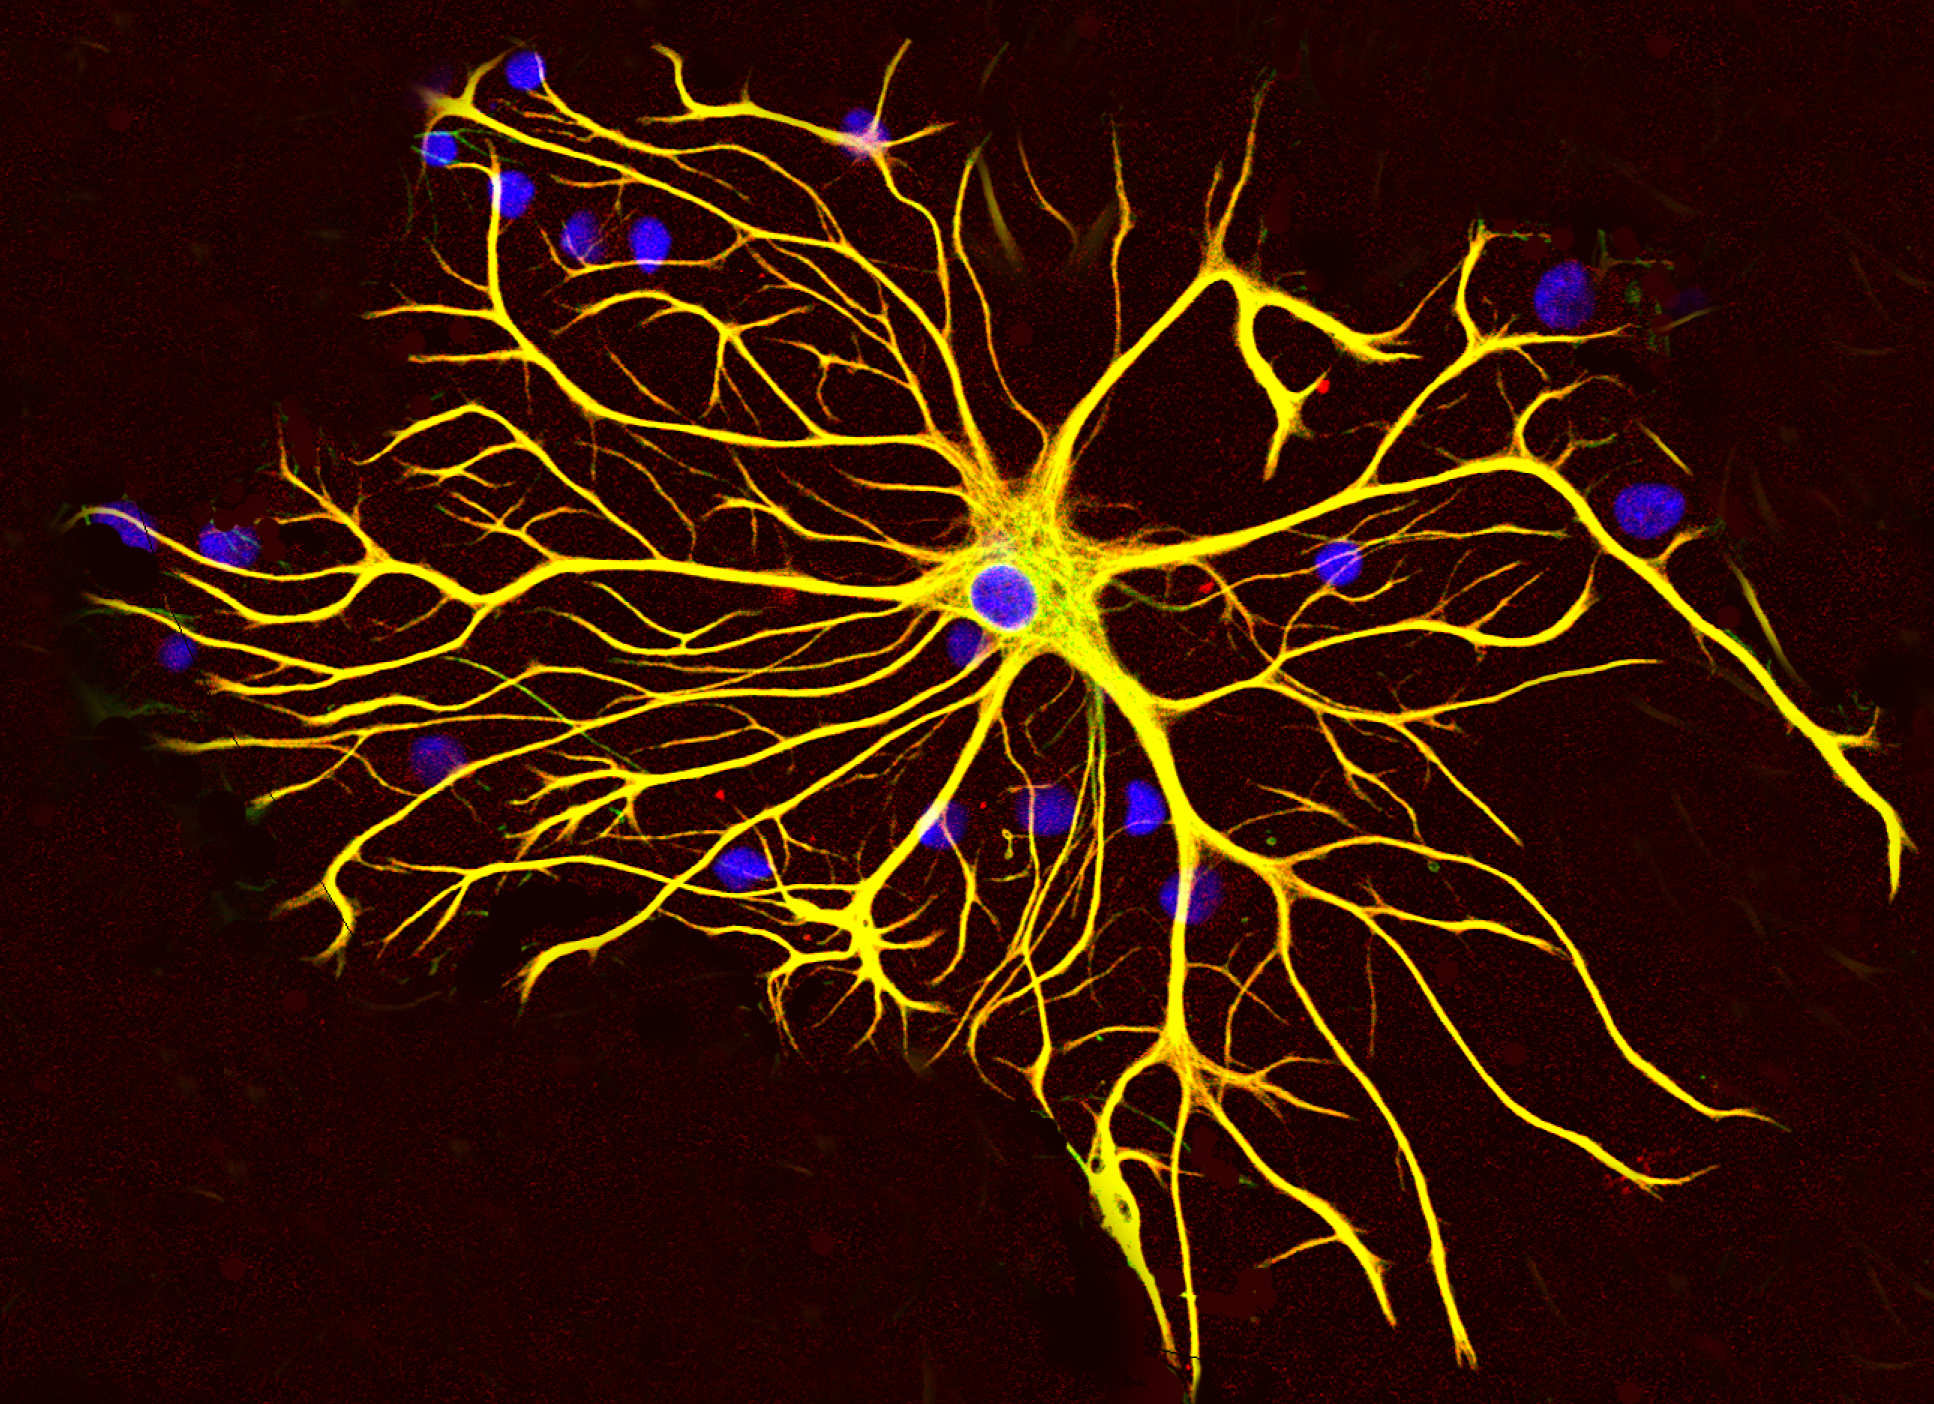 A microscopic image of an astrocyte cell 